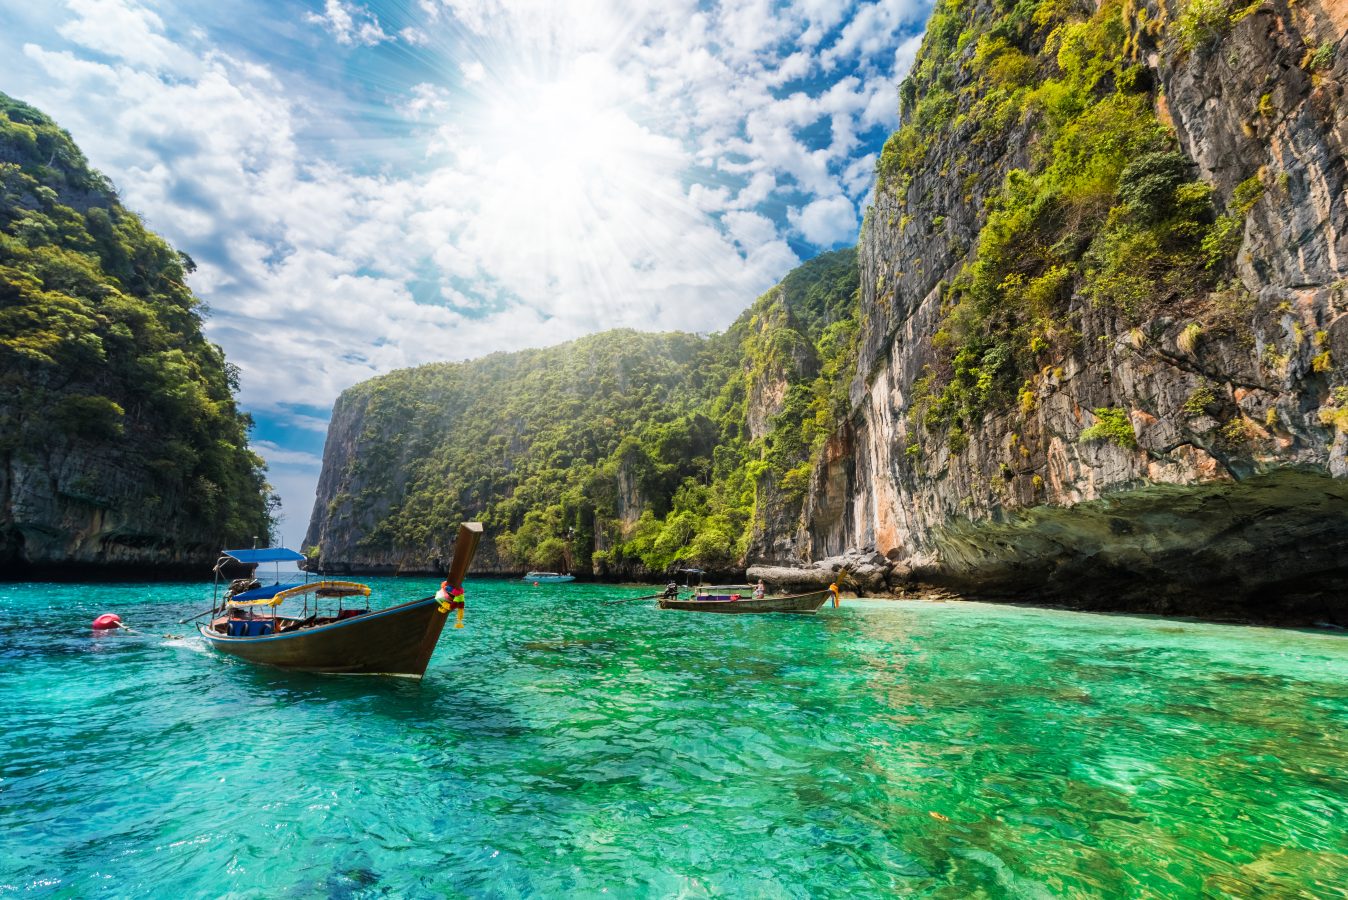 Beautiful landscape with traditional boat on the sea in Phi Phi Lee region of Losama Bay in Thailand.